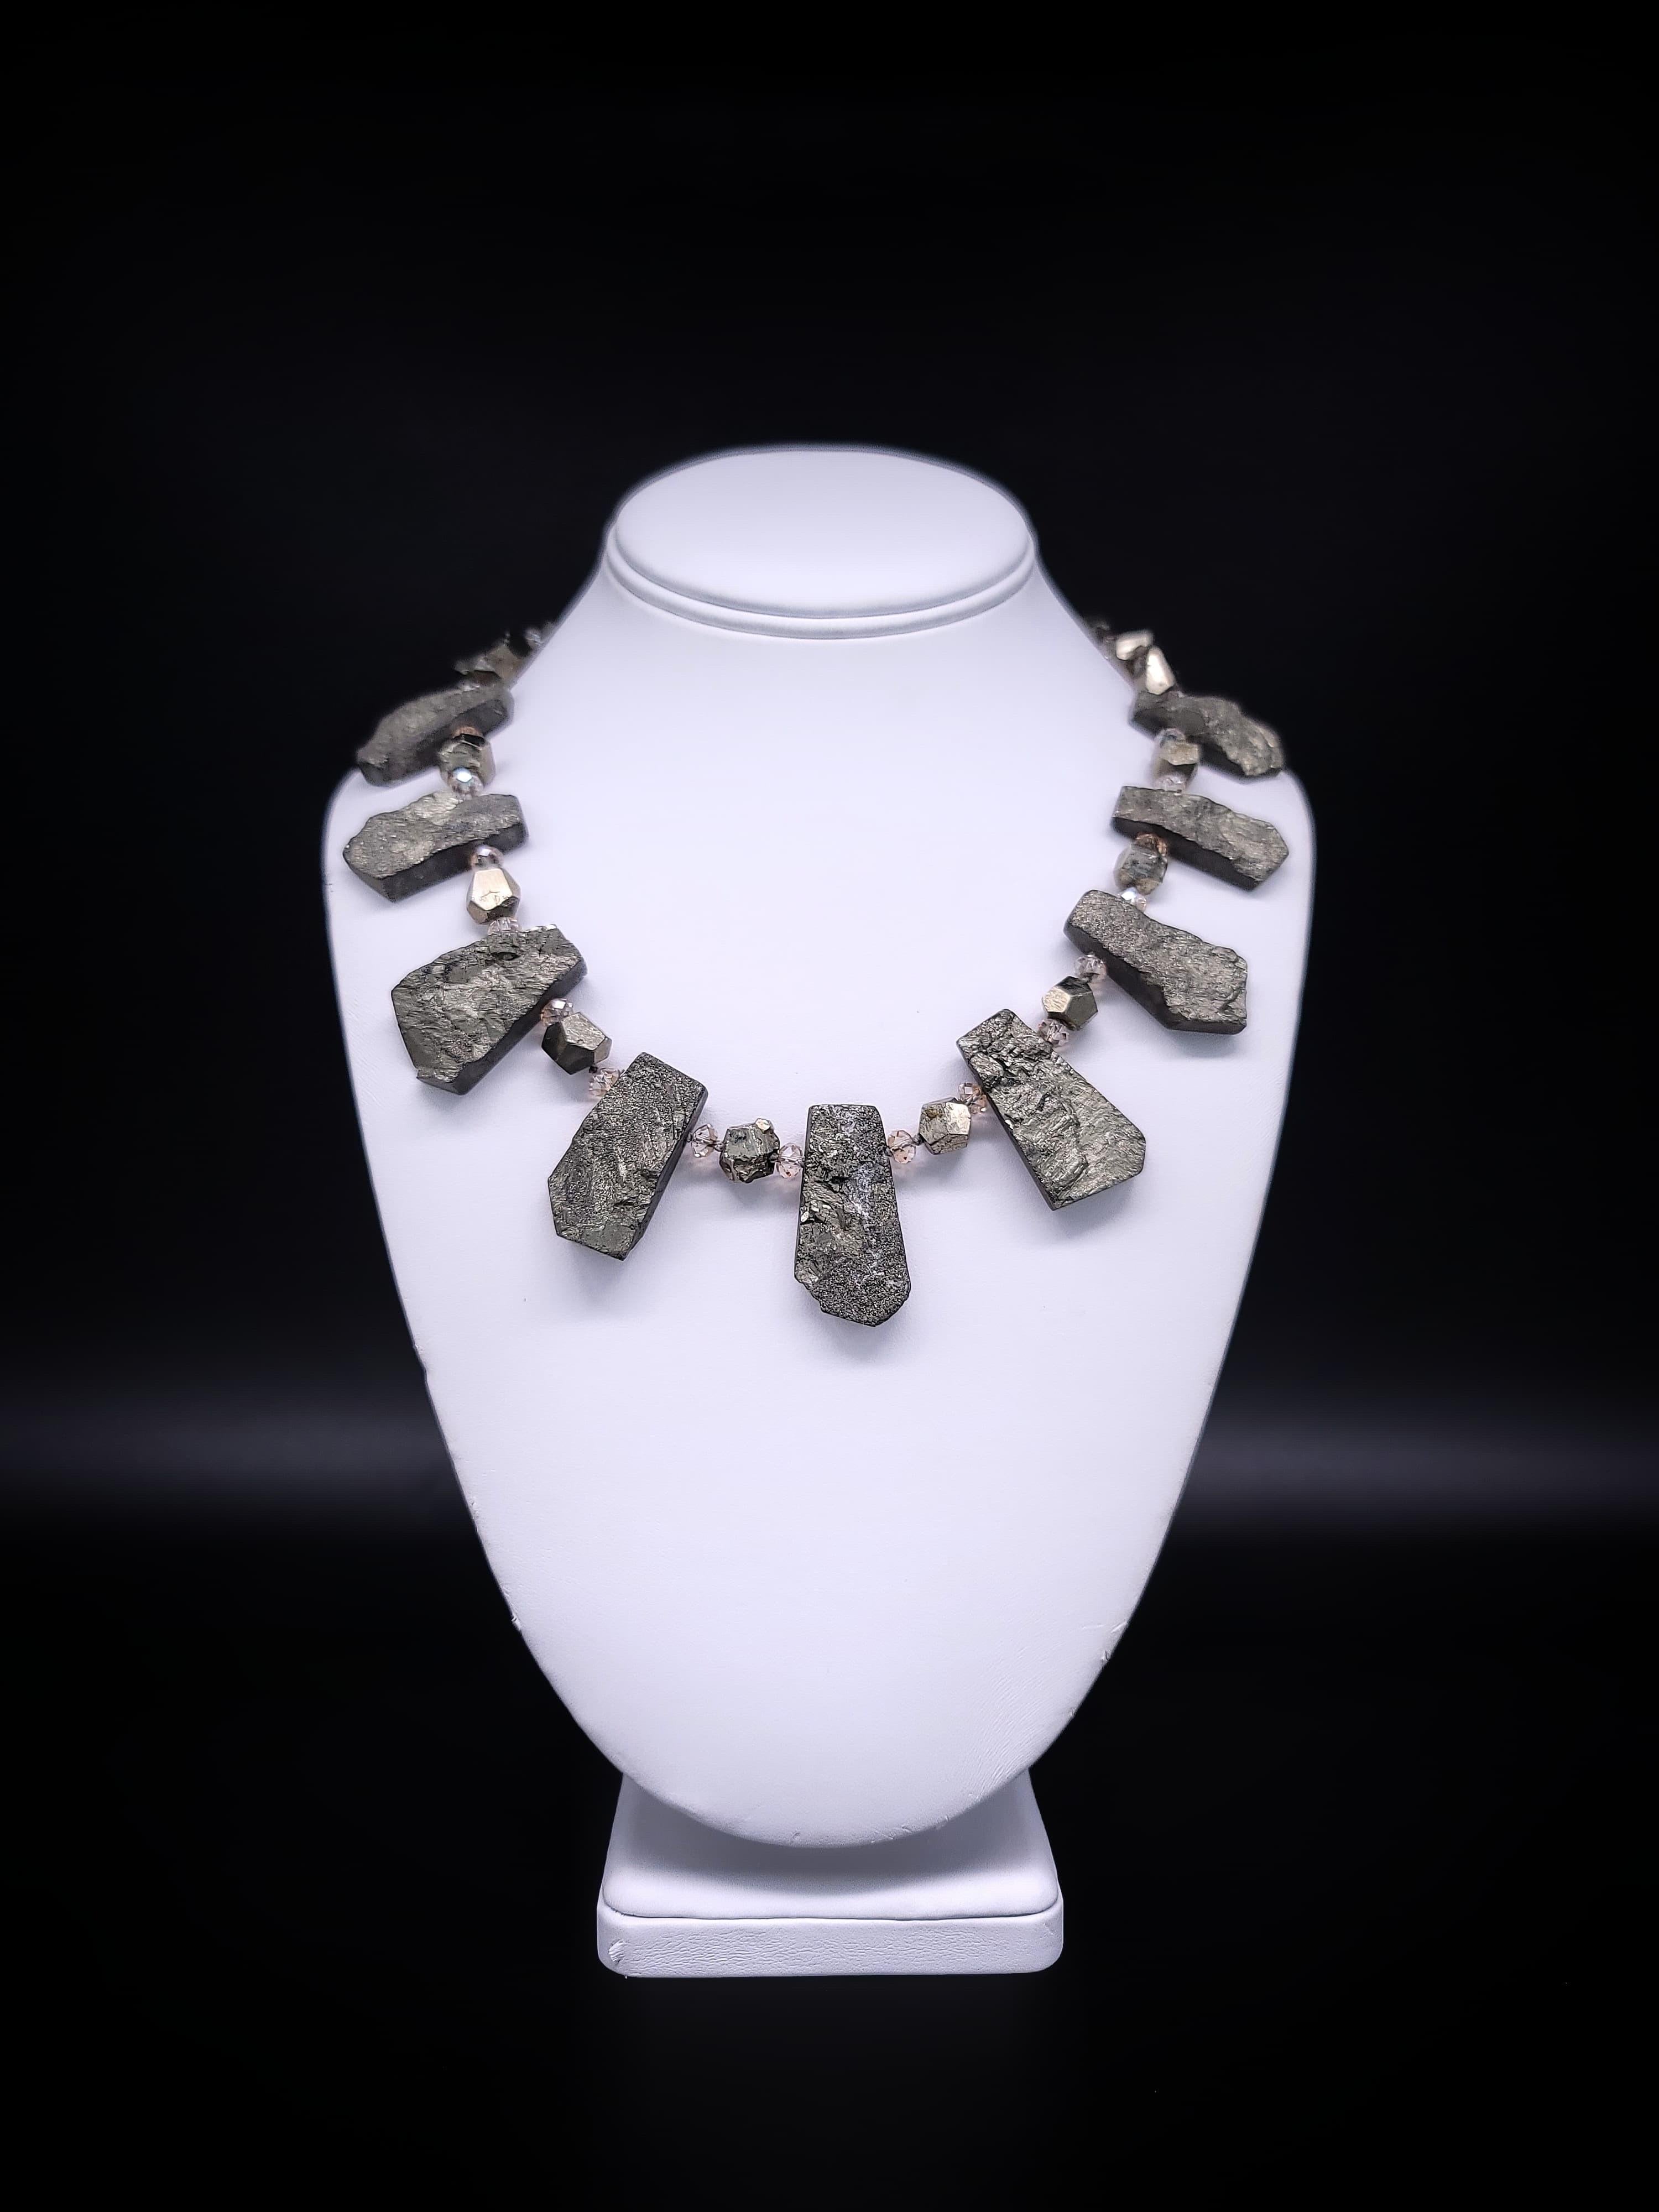 One-of--a-Kind

Introducing our latest fashion statement piece, featuring the captivating Pyrite gemstone necklace. This gemstone has a fascinating history, as it was discovered in prehistoric burial mounds and is named after the Greek word for